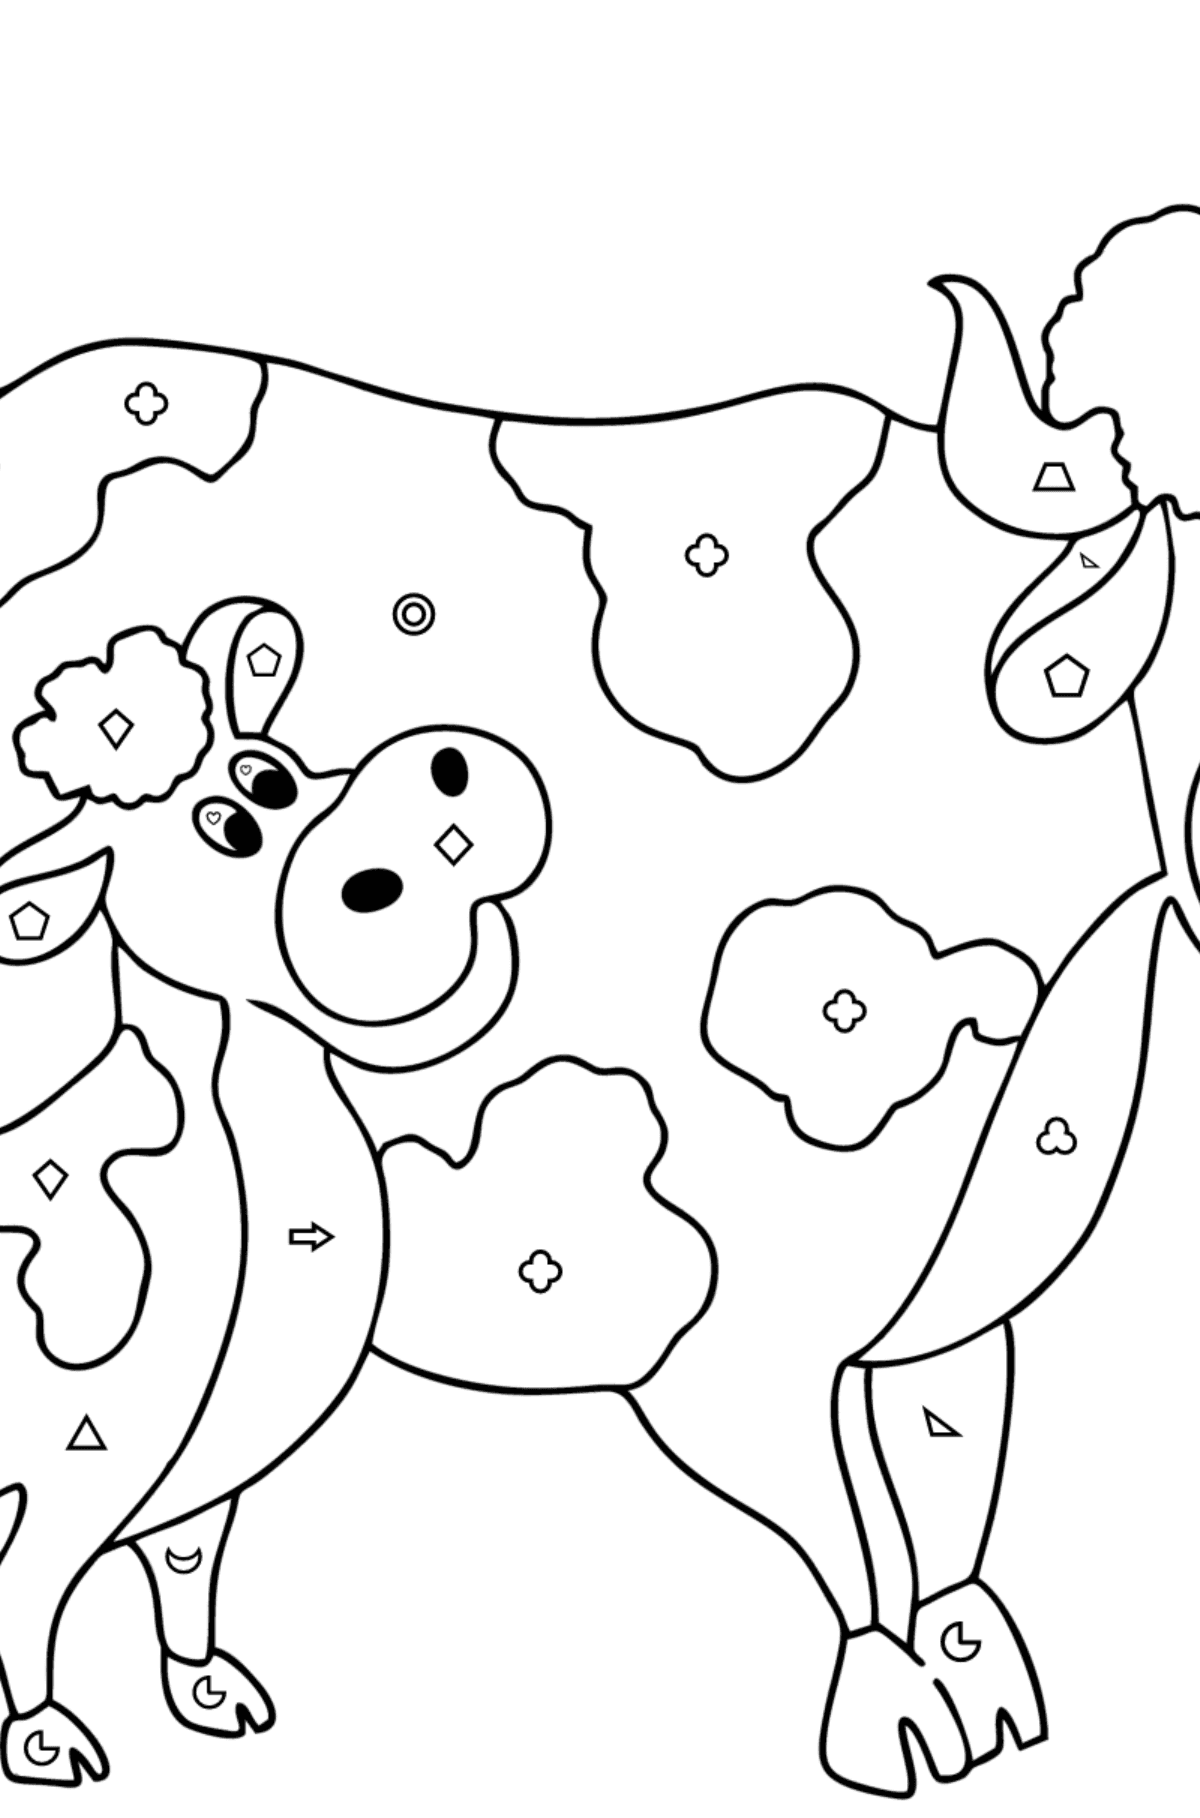 Cow and calf coloring pages - Coloring by Geometric Shapes for Kids